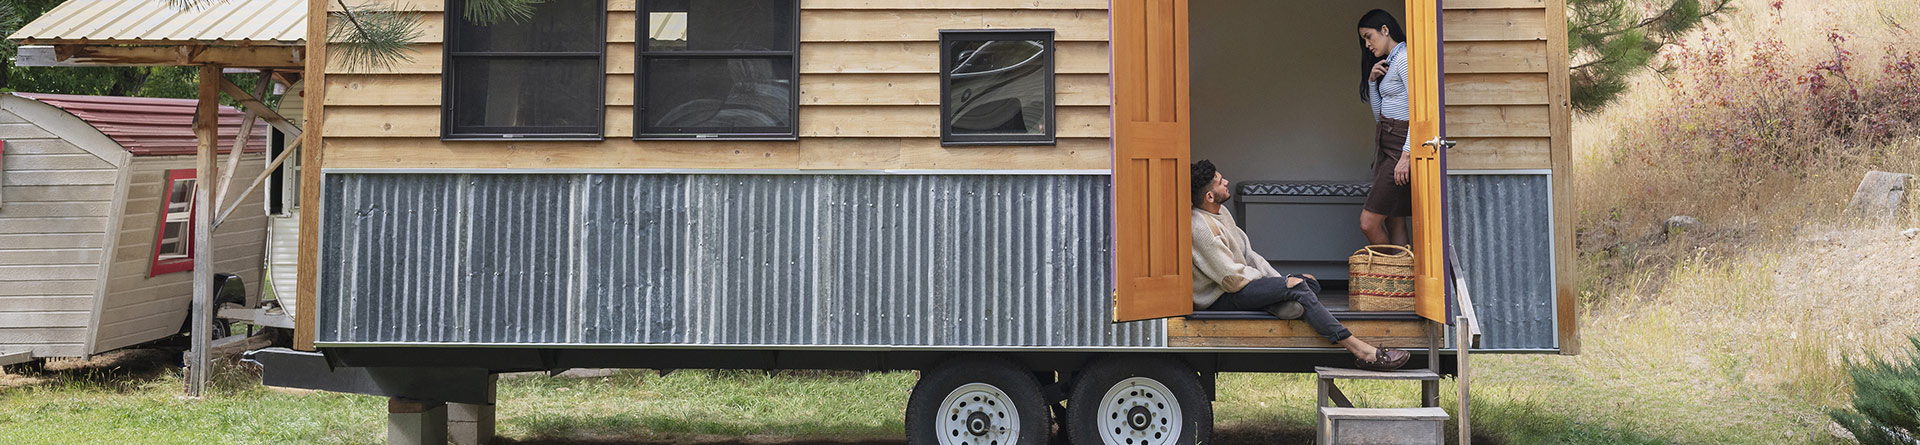 Your Guide to Tiny Houses Regulations